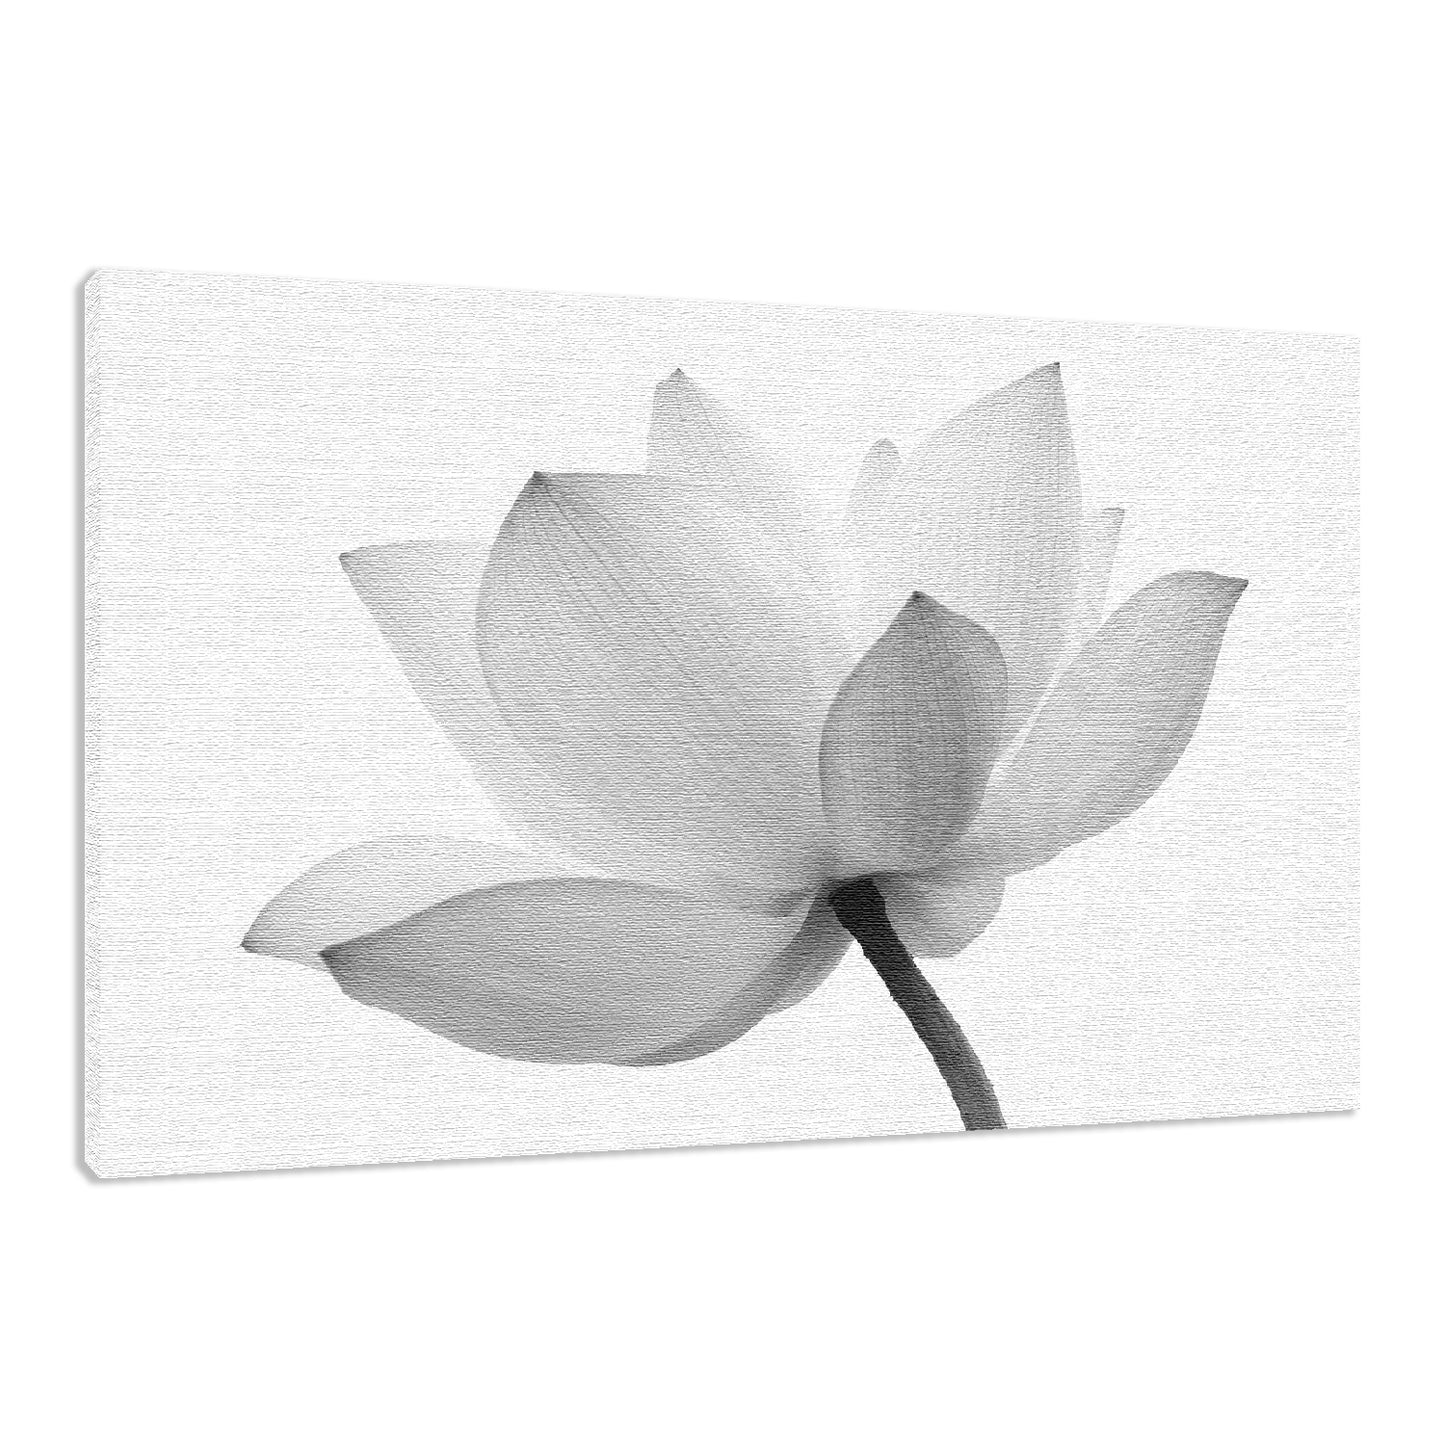 Lotus Flower Black and White Floral Nature Photo Fine Art Canvas Print  - PIPAFINEART